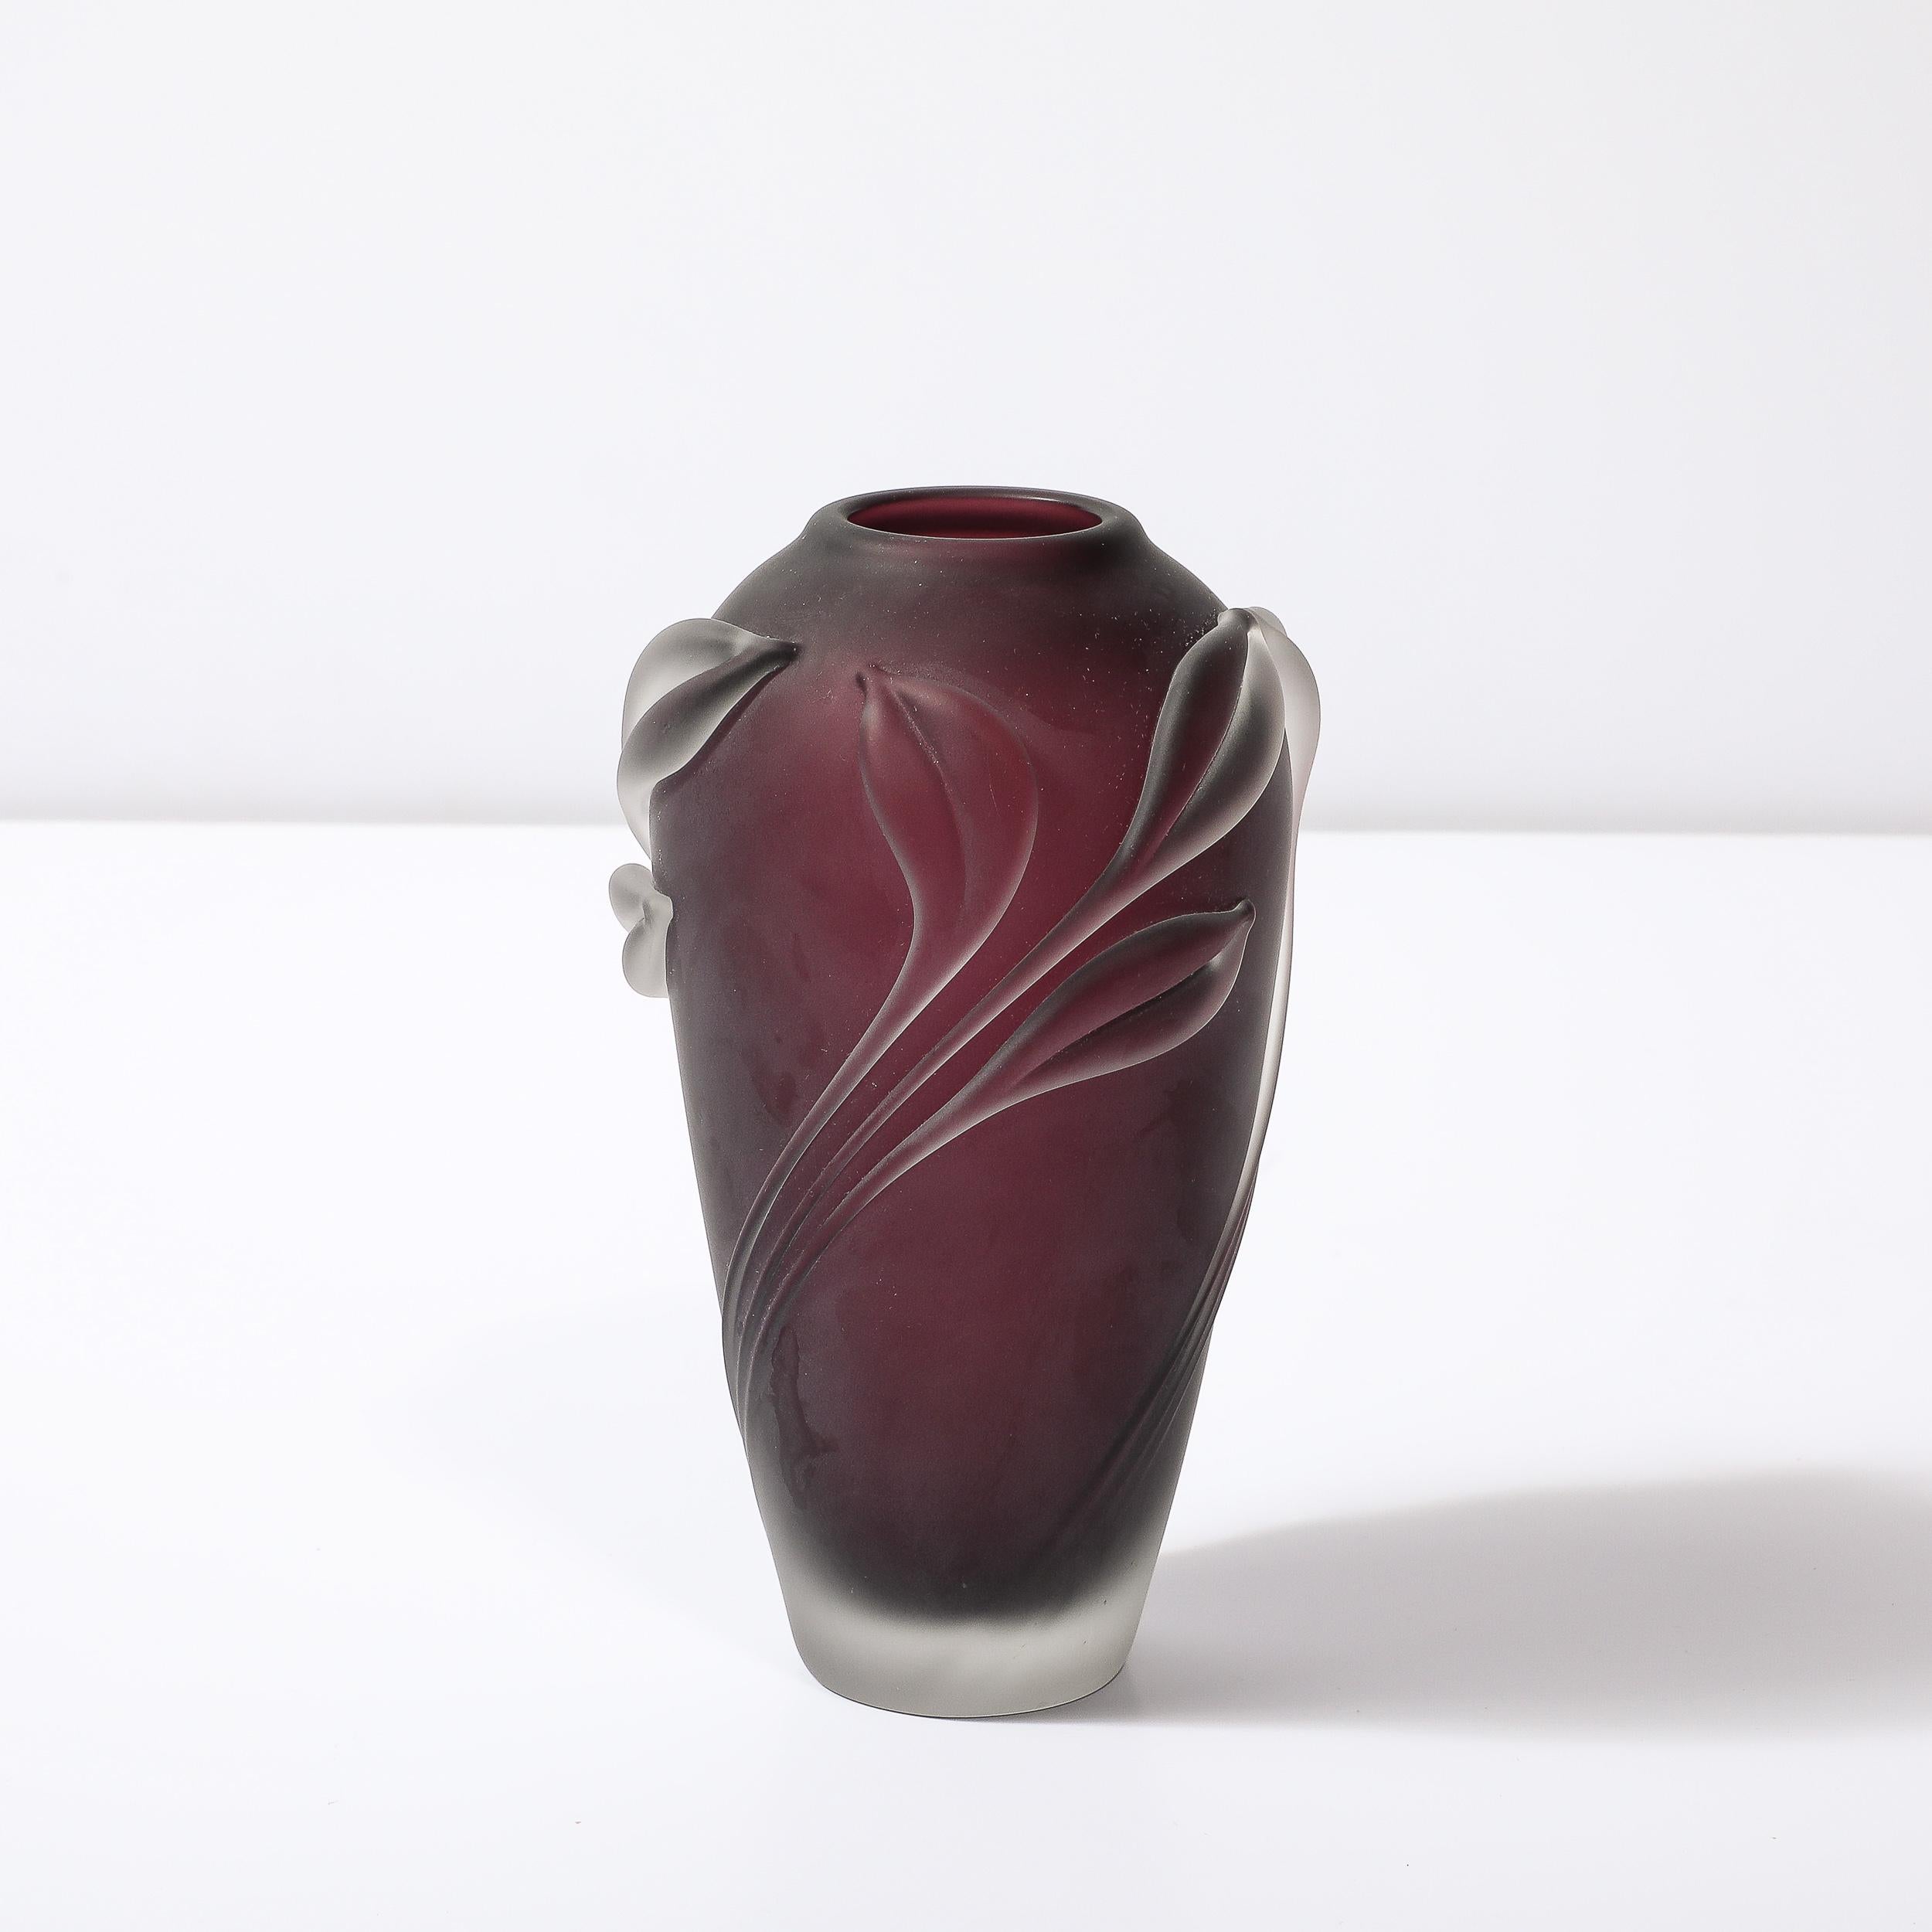 This lovely and sophisticated Modernist Frosted Glass Vase with Floral Relief Detailing in Smoked Amethyst by William Glasner originates from the United States, Circa 1990. Features a beautiful tapered form rendered in a stunning hue of smoked